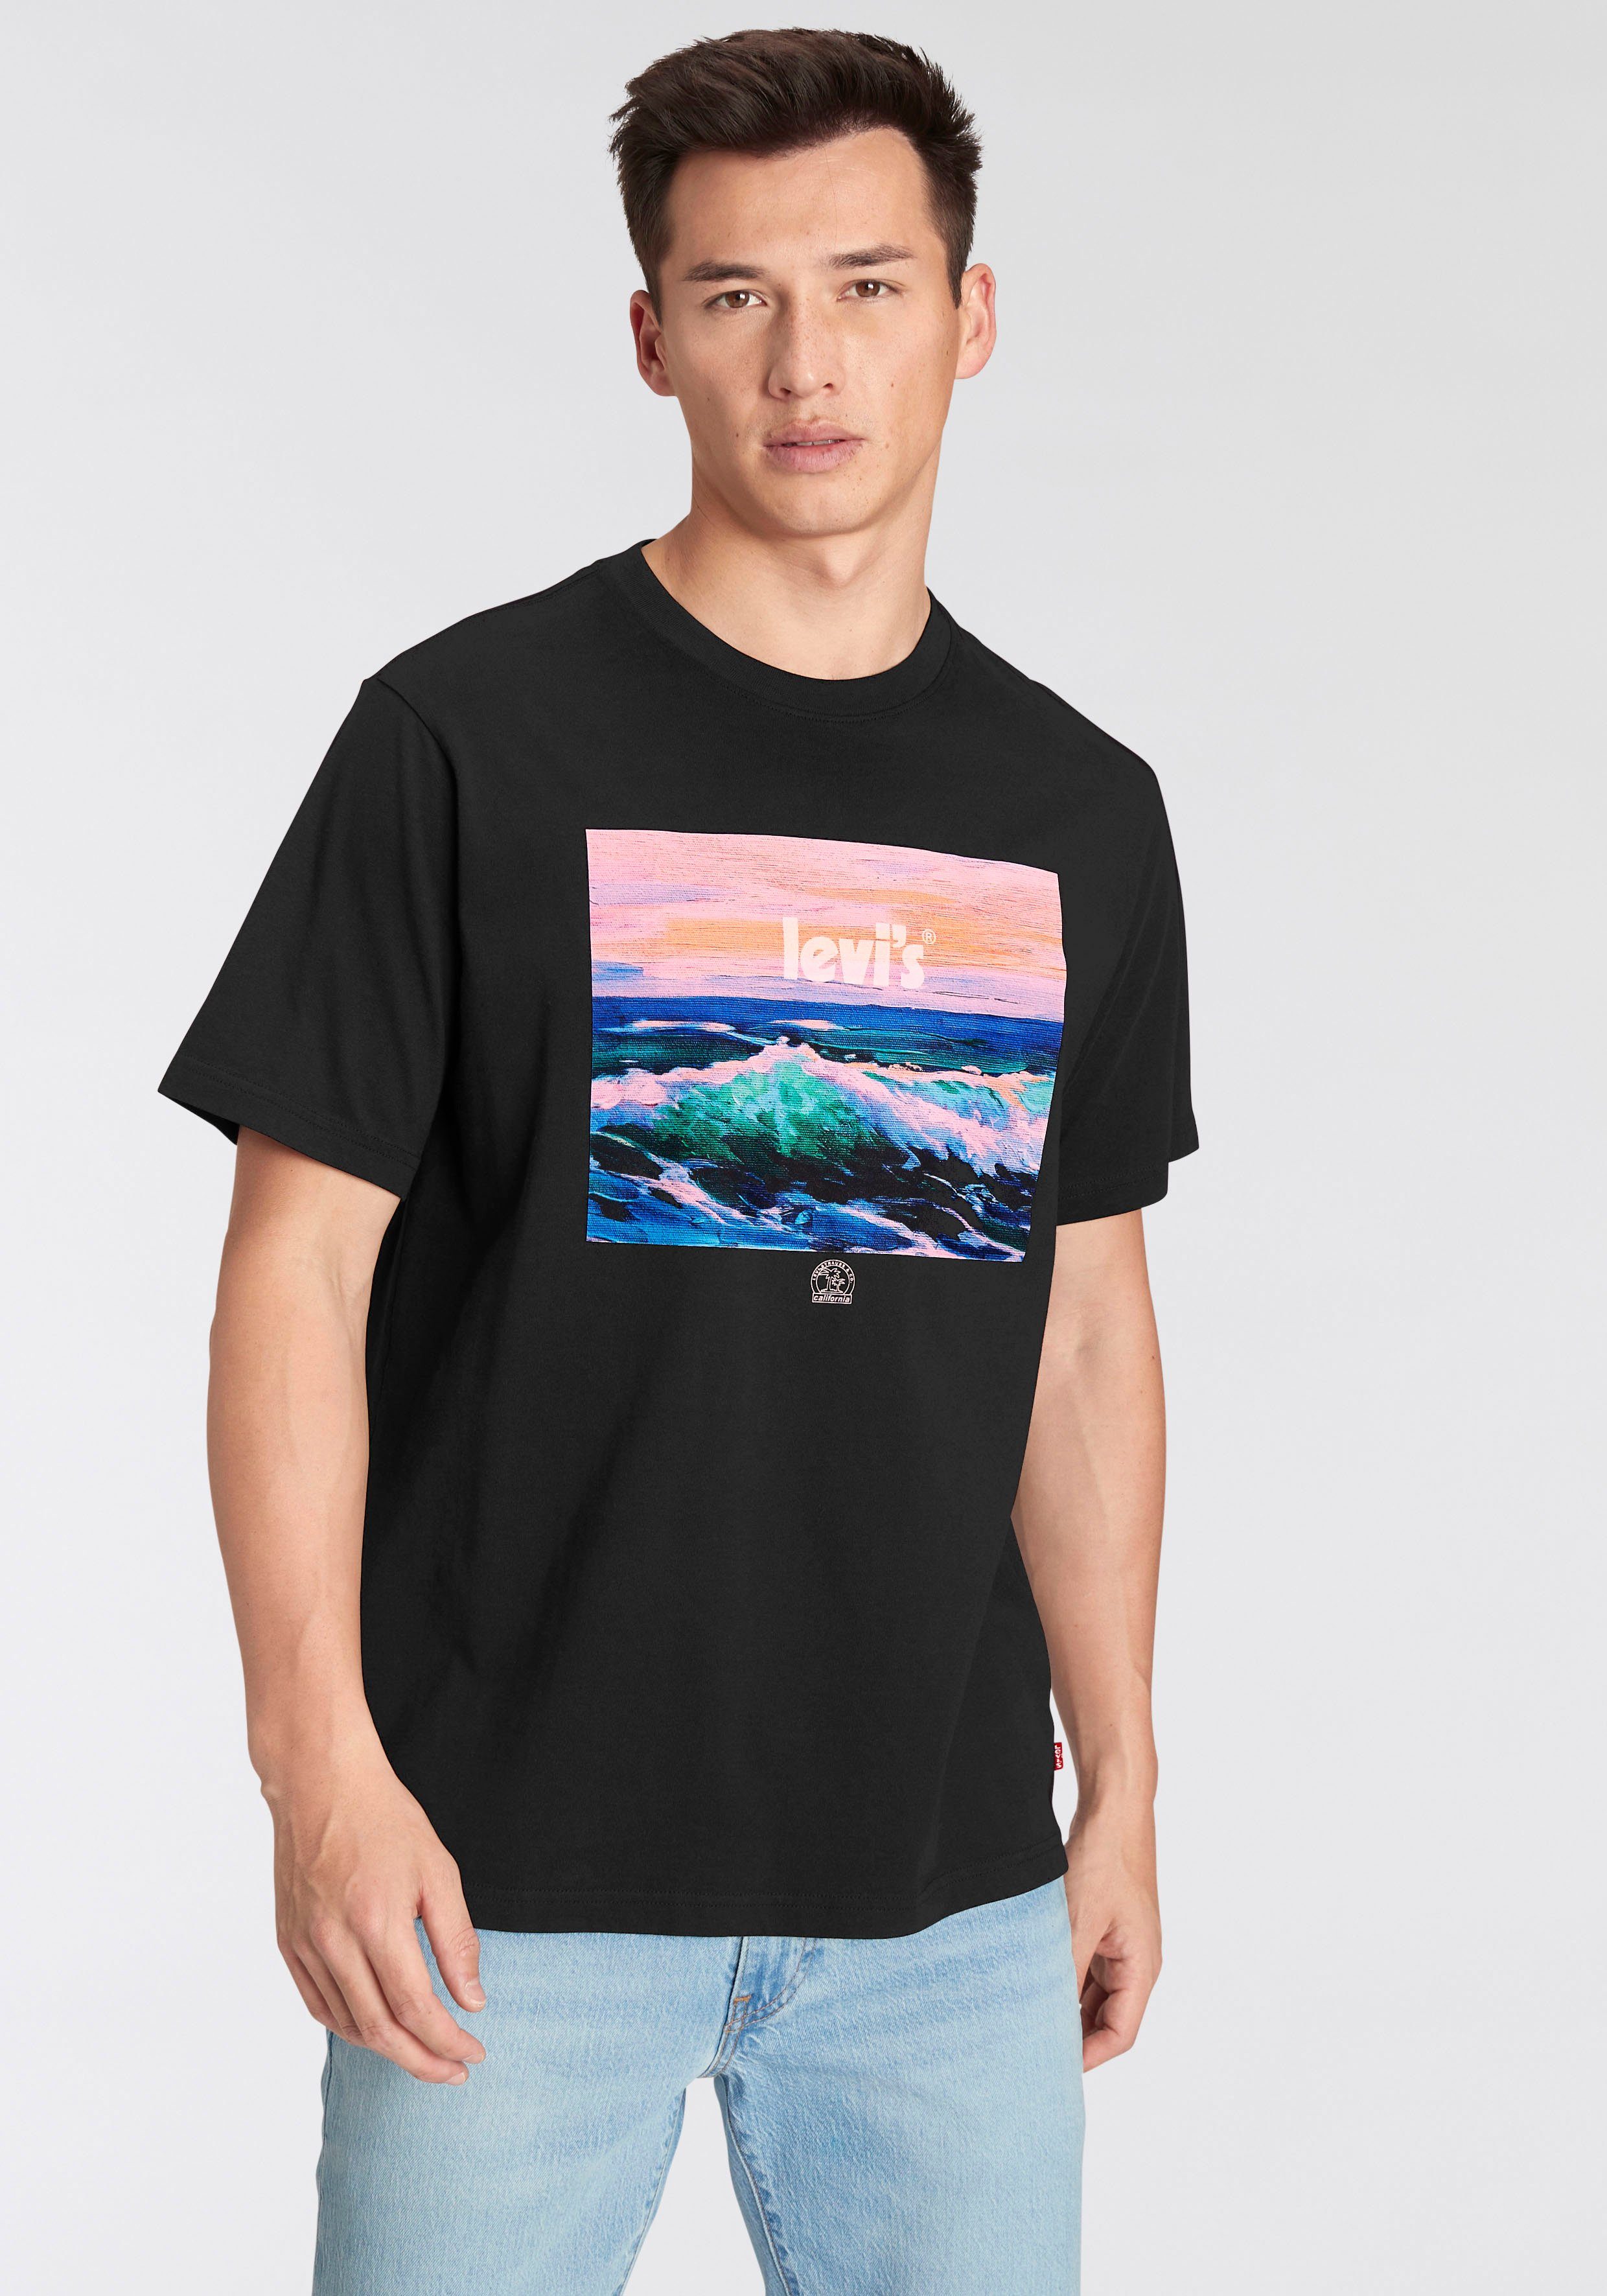 Levi's® T-Shirt SS RELAXED WAVES FIT CAVIAR TEE Frontprint POSTER großem mit